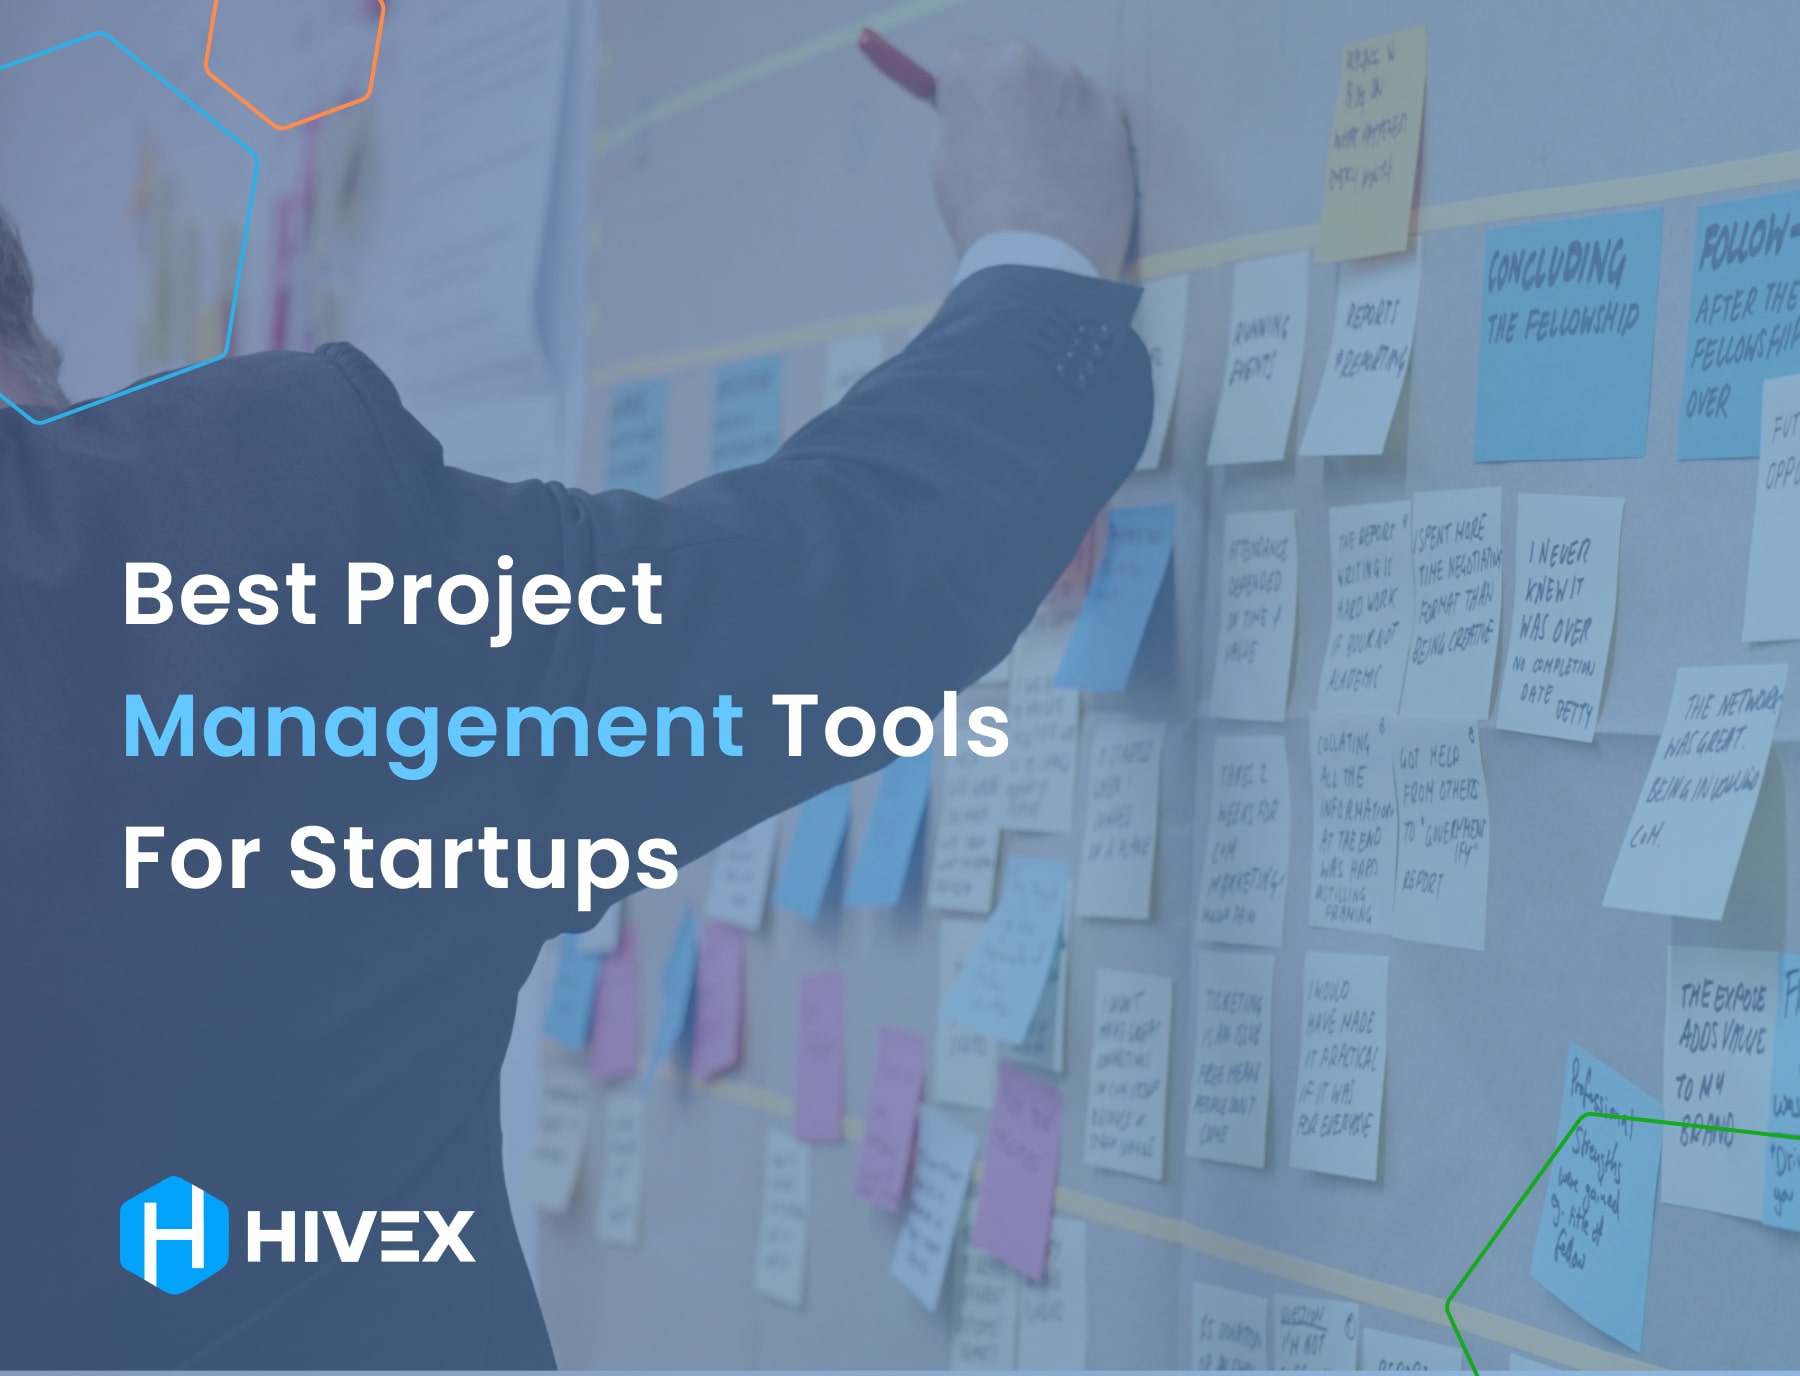 15 Best Project Management Tools For Startups